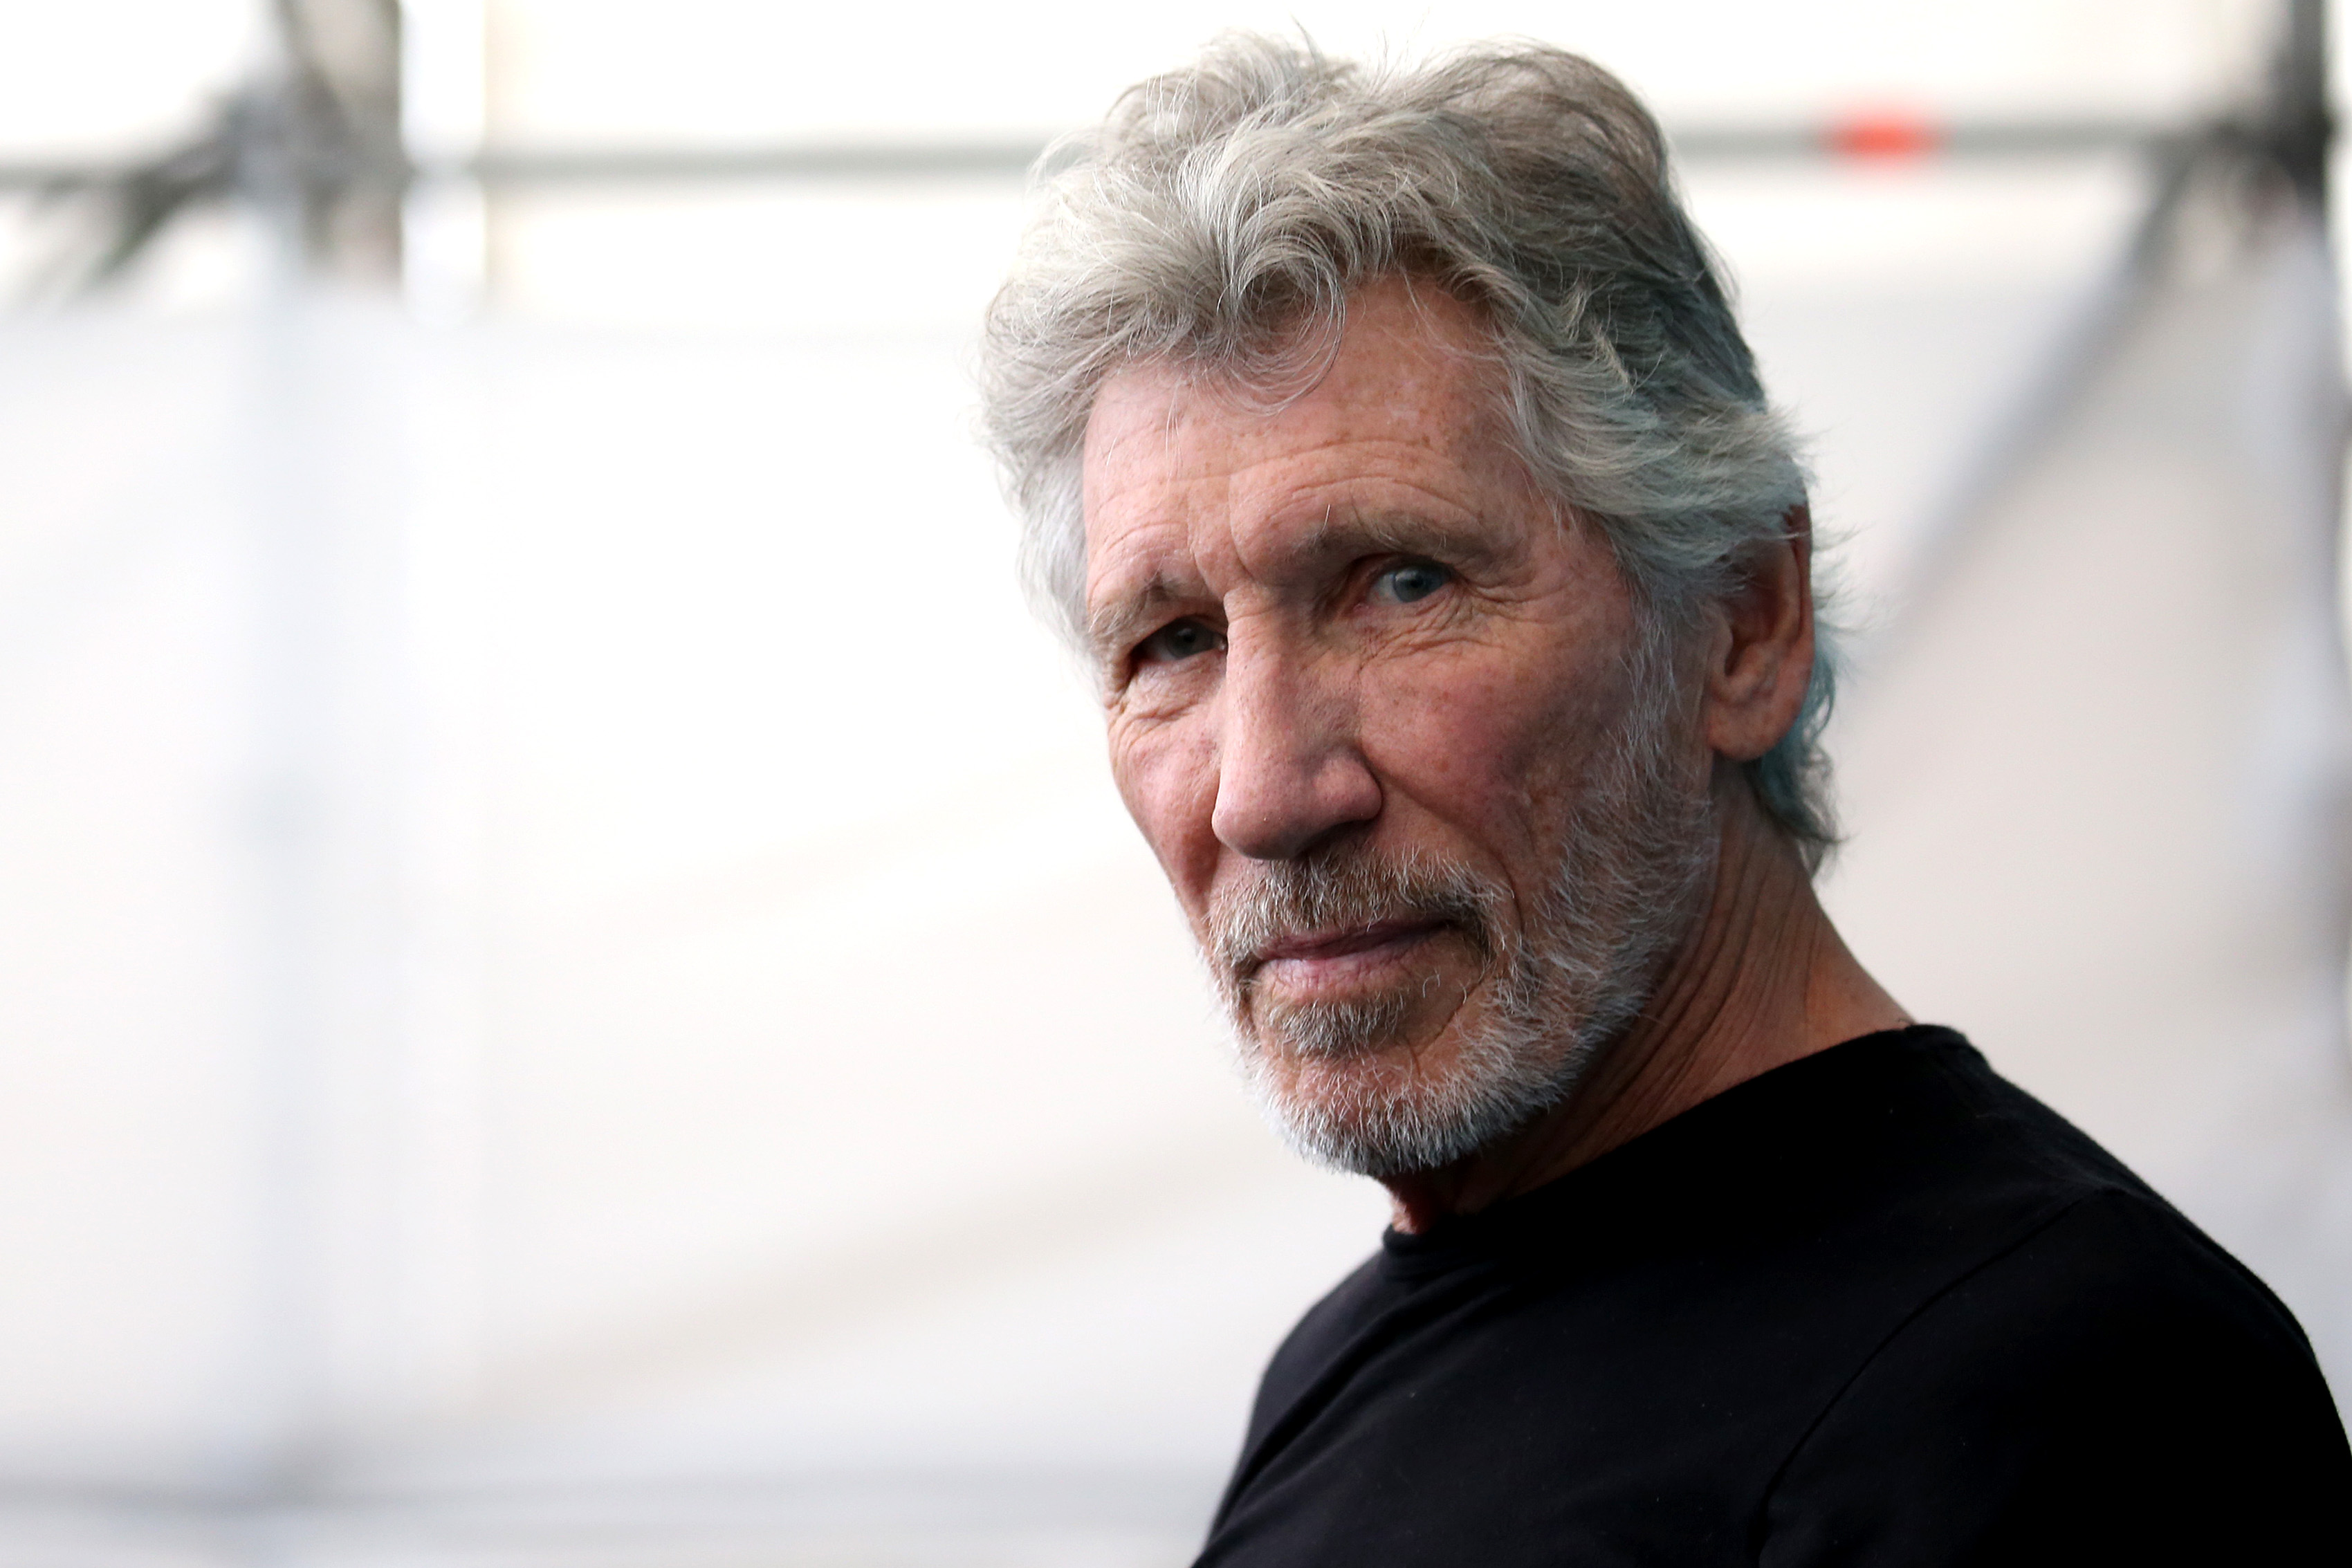 Roger Waters attends the "Roger Waters Us + Them" Photocall during the 76th Venice Film Festival at on September 06, 2019 in Venice, Italy.